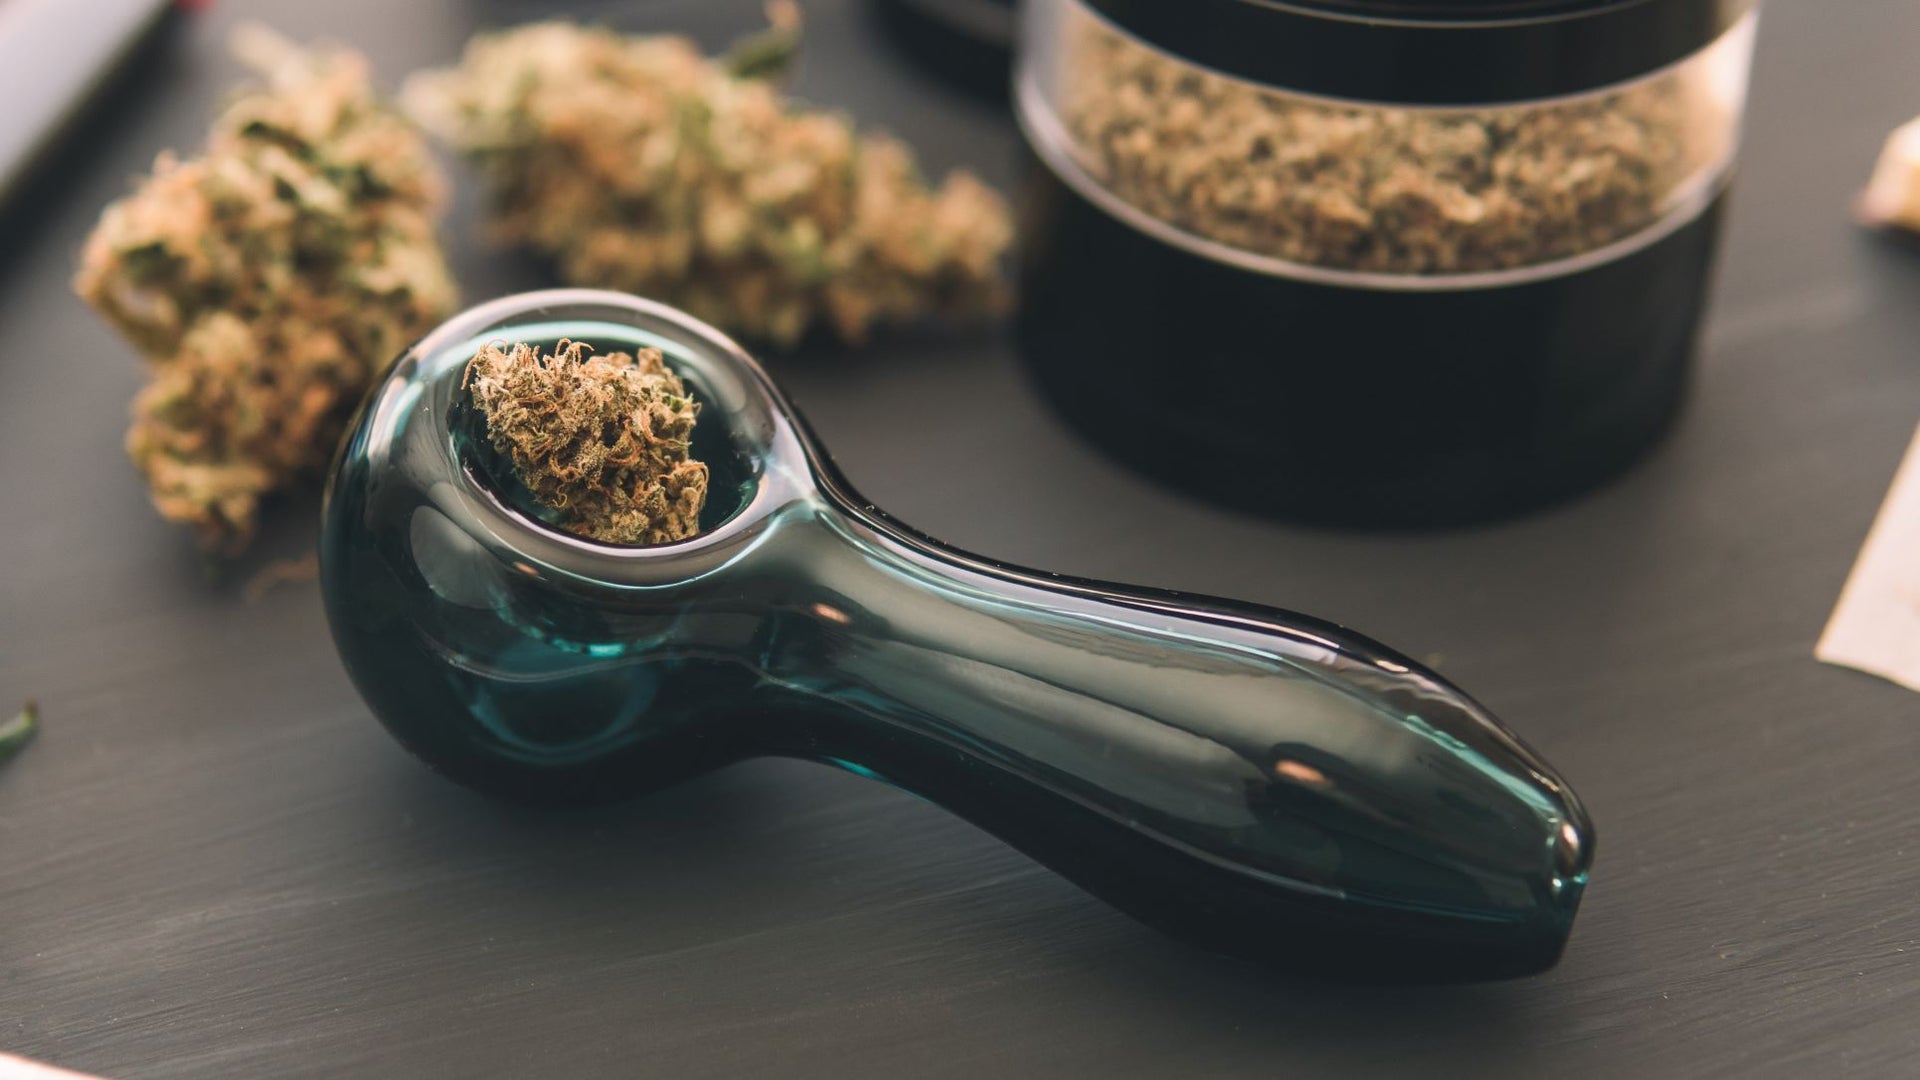 Weed Pipes: 10 Best Smoking Pipes for Weed in 2022 - 420 Science